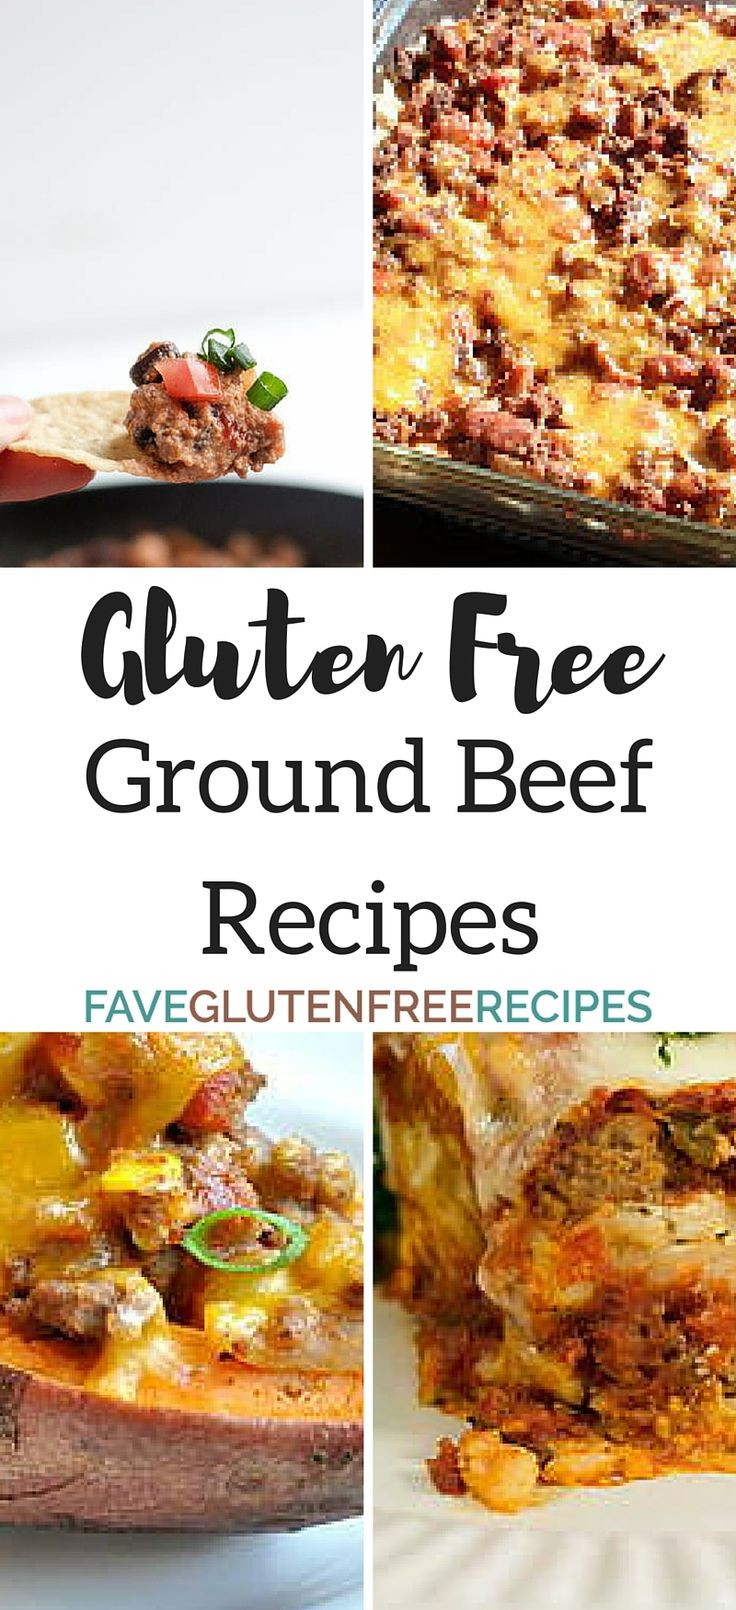 Gluten Free Dairy Free Ground Beef Recipes
 1000 images about GLUTIN FREE FOODS on Pinterest